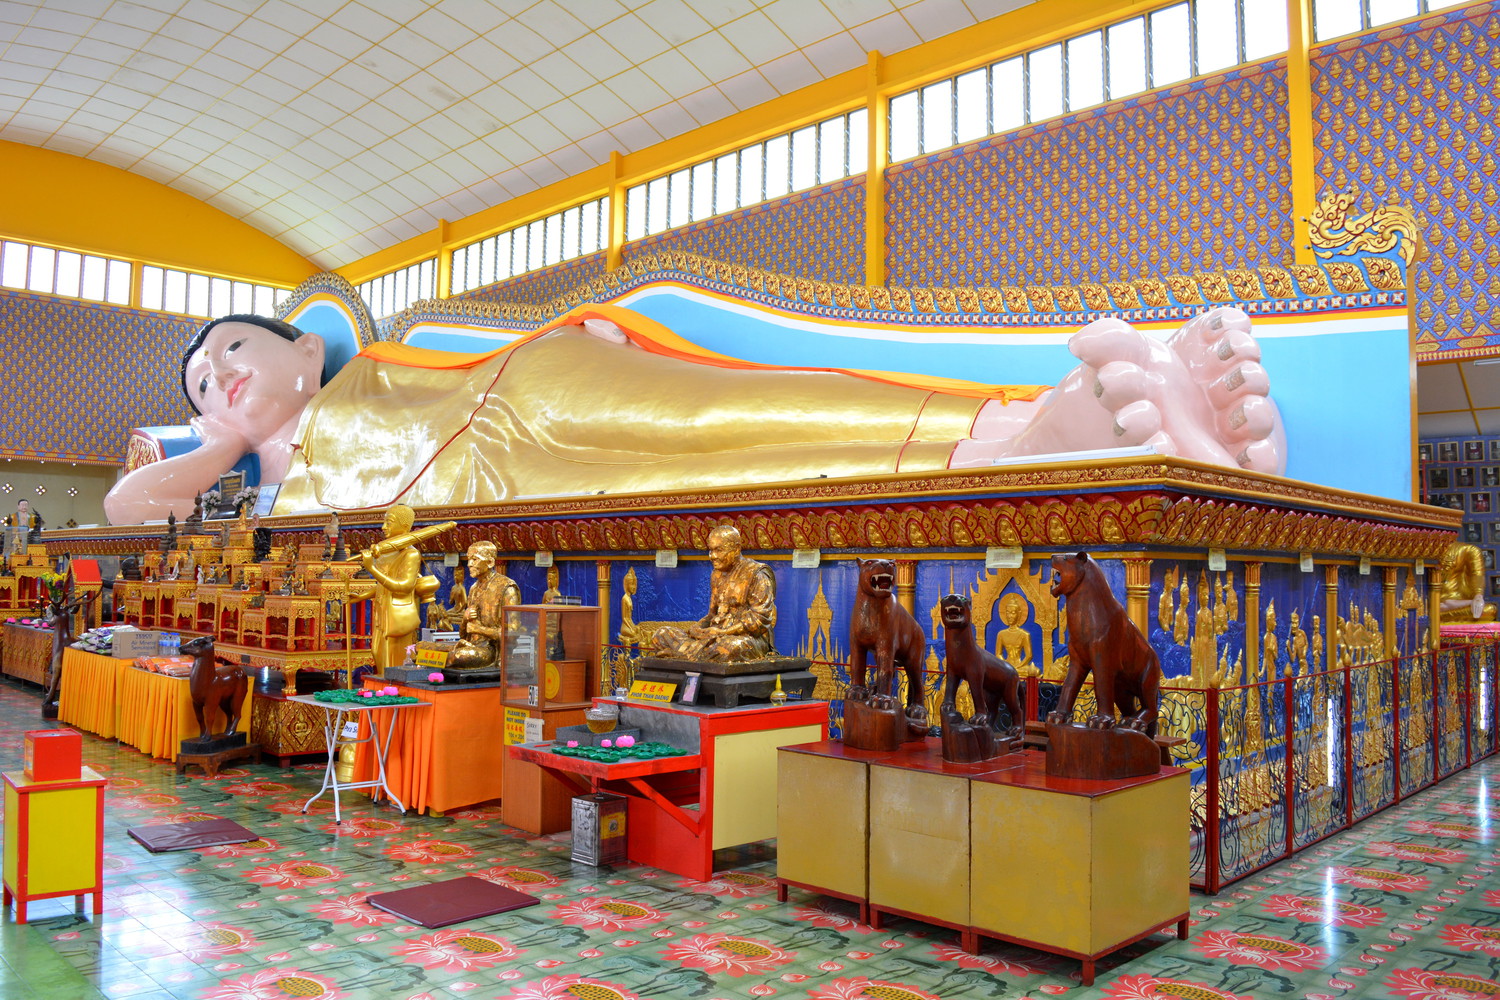 A massive statue of reclining Buddha with many smaller statues in front of it inside a temple